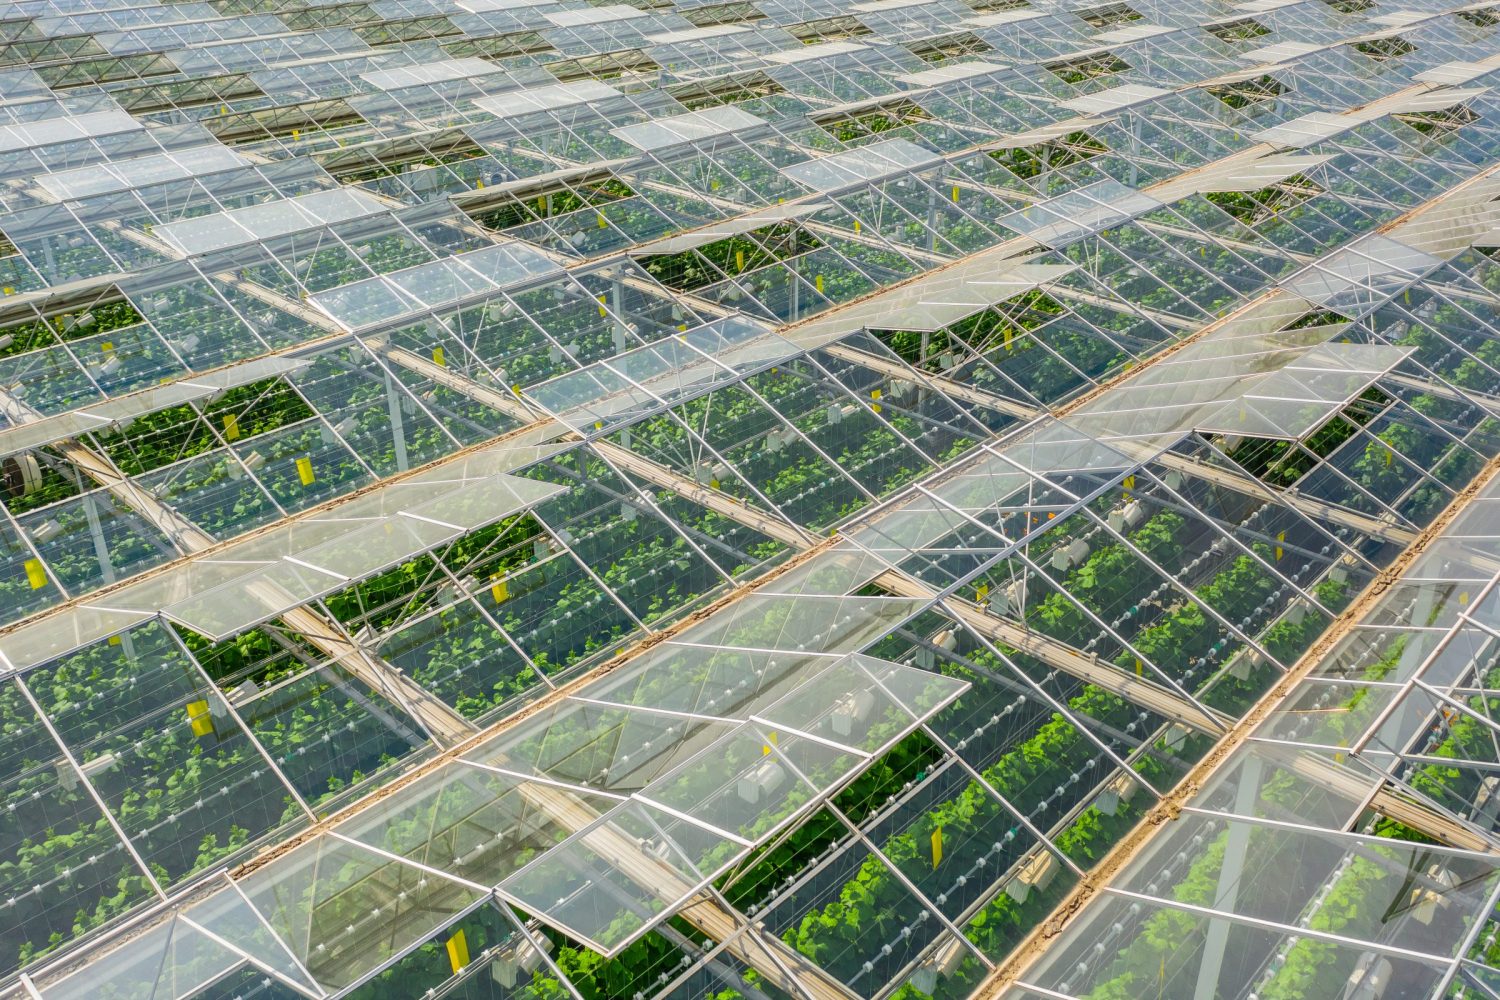 Aerial view of greenhouse area with vegetables